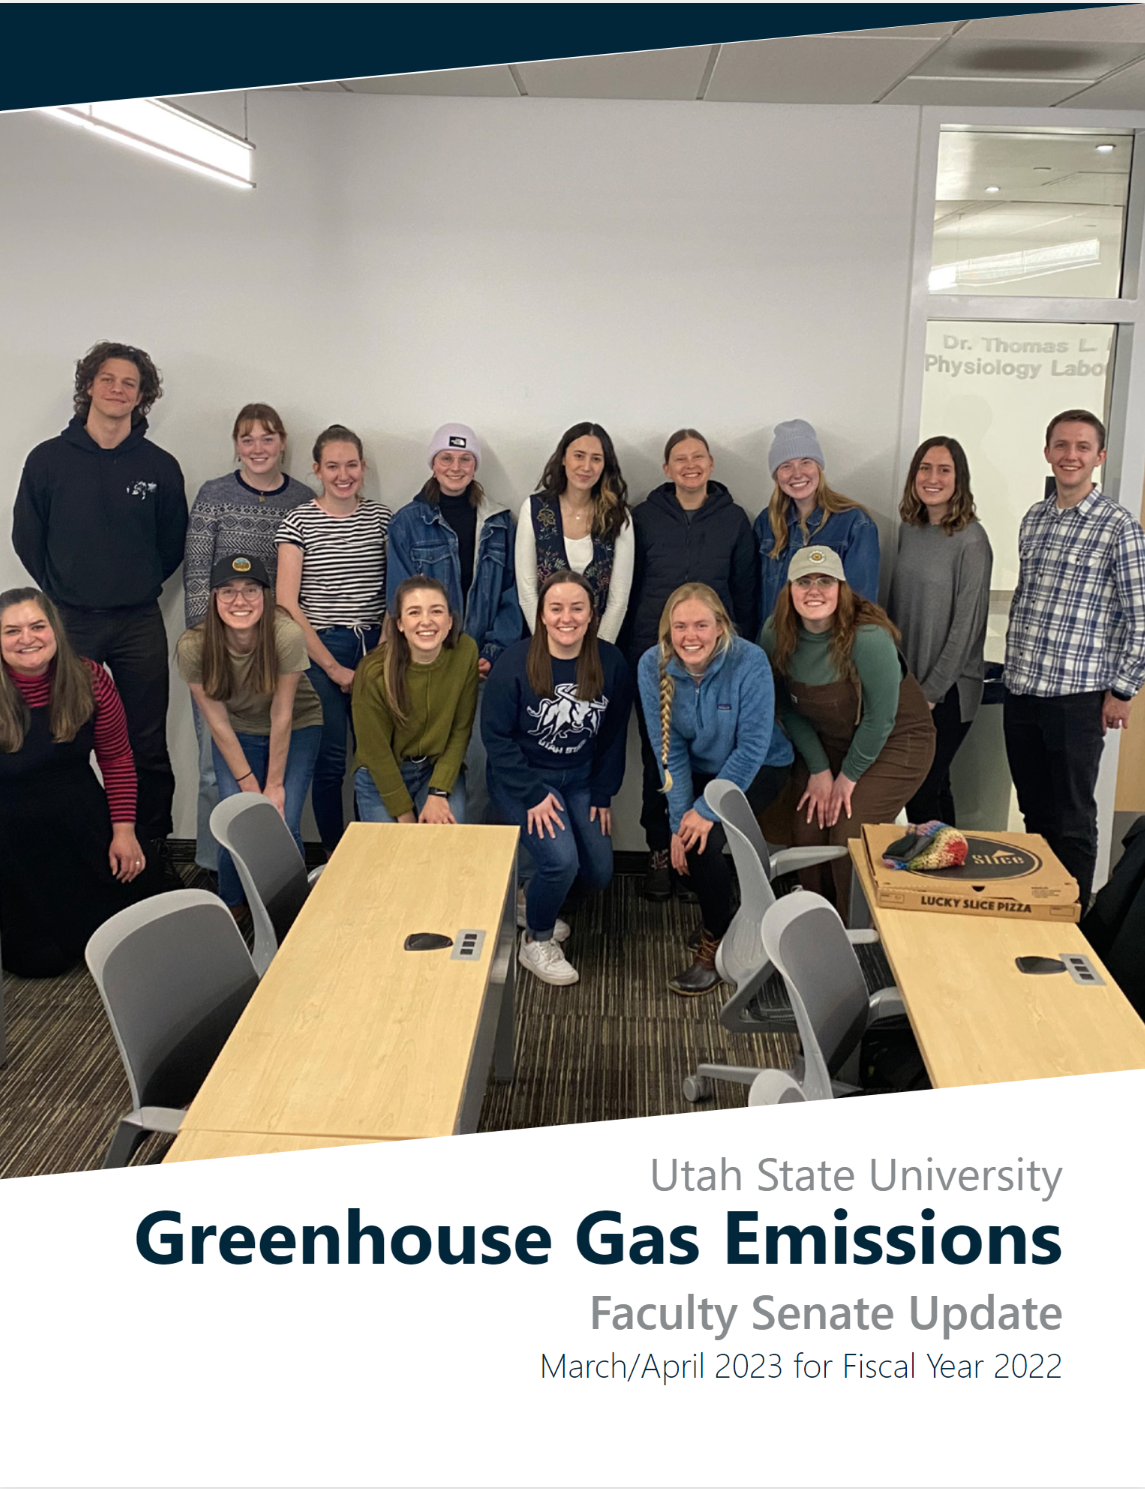 A group of staff and students look into the camera smiling in a classroom. The front of the image reads "Utah State University Greenhouse Gas Emissions; Faculty Senate Update"